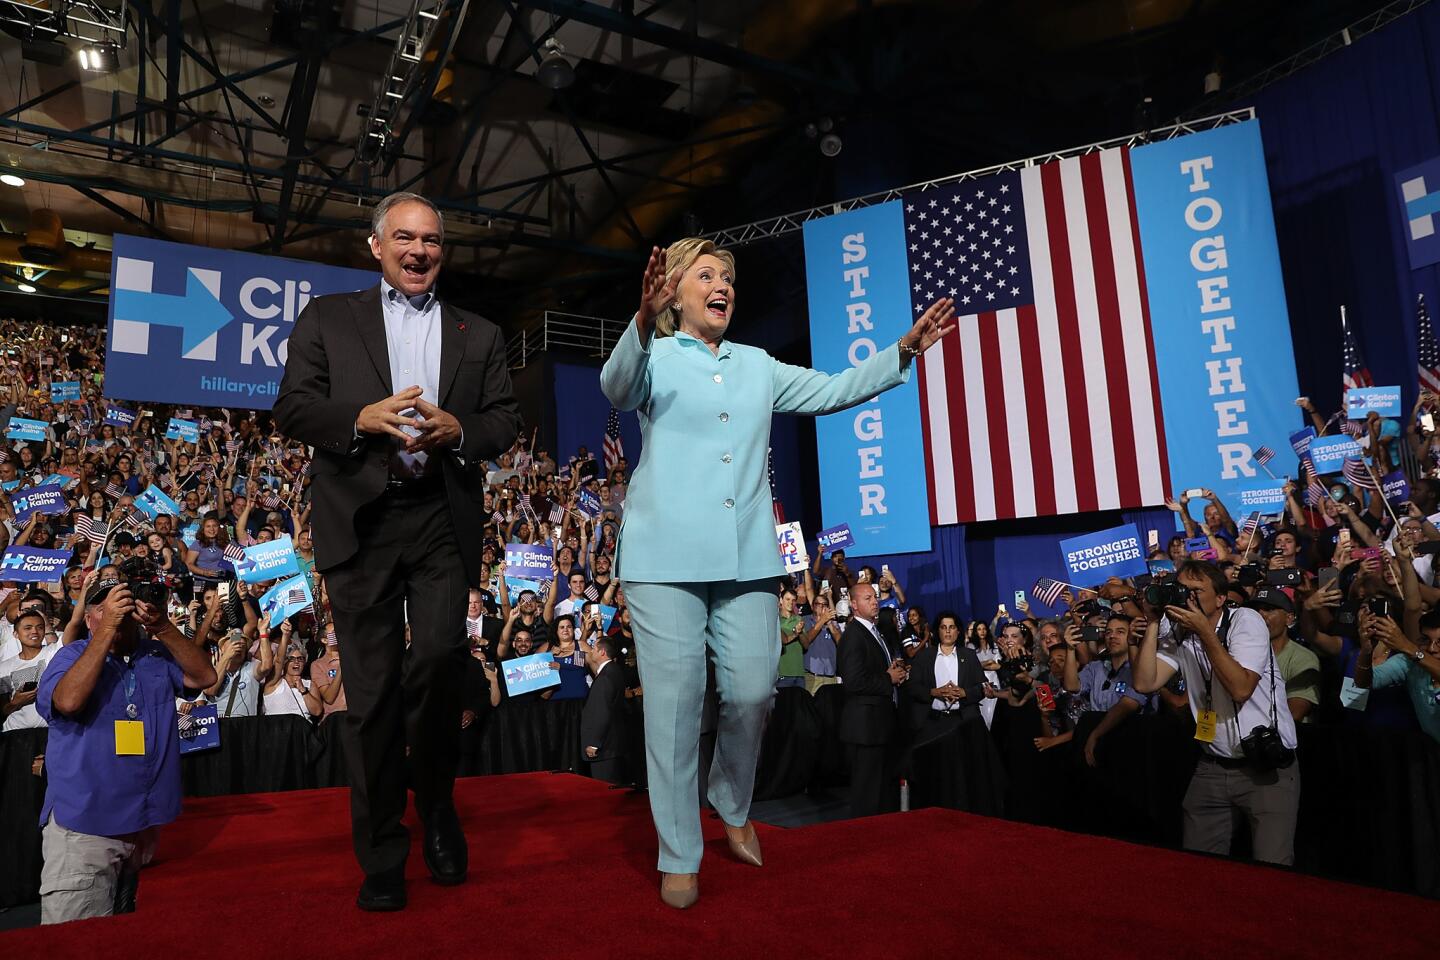 Presumptive Democratic presidential nominee Hillary Clinton introduces her running mate, Va. Sen. Tim Kaine, at rally at Florida International University in Miami on July 23, 2016.